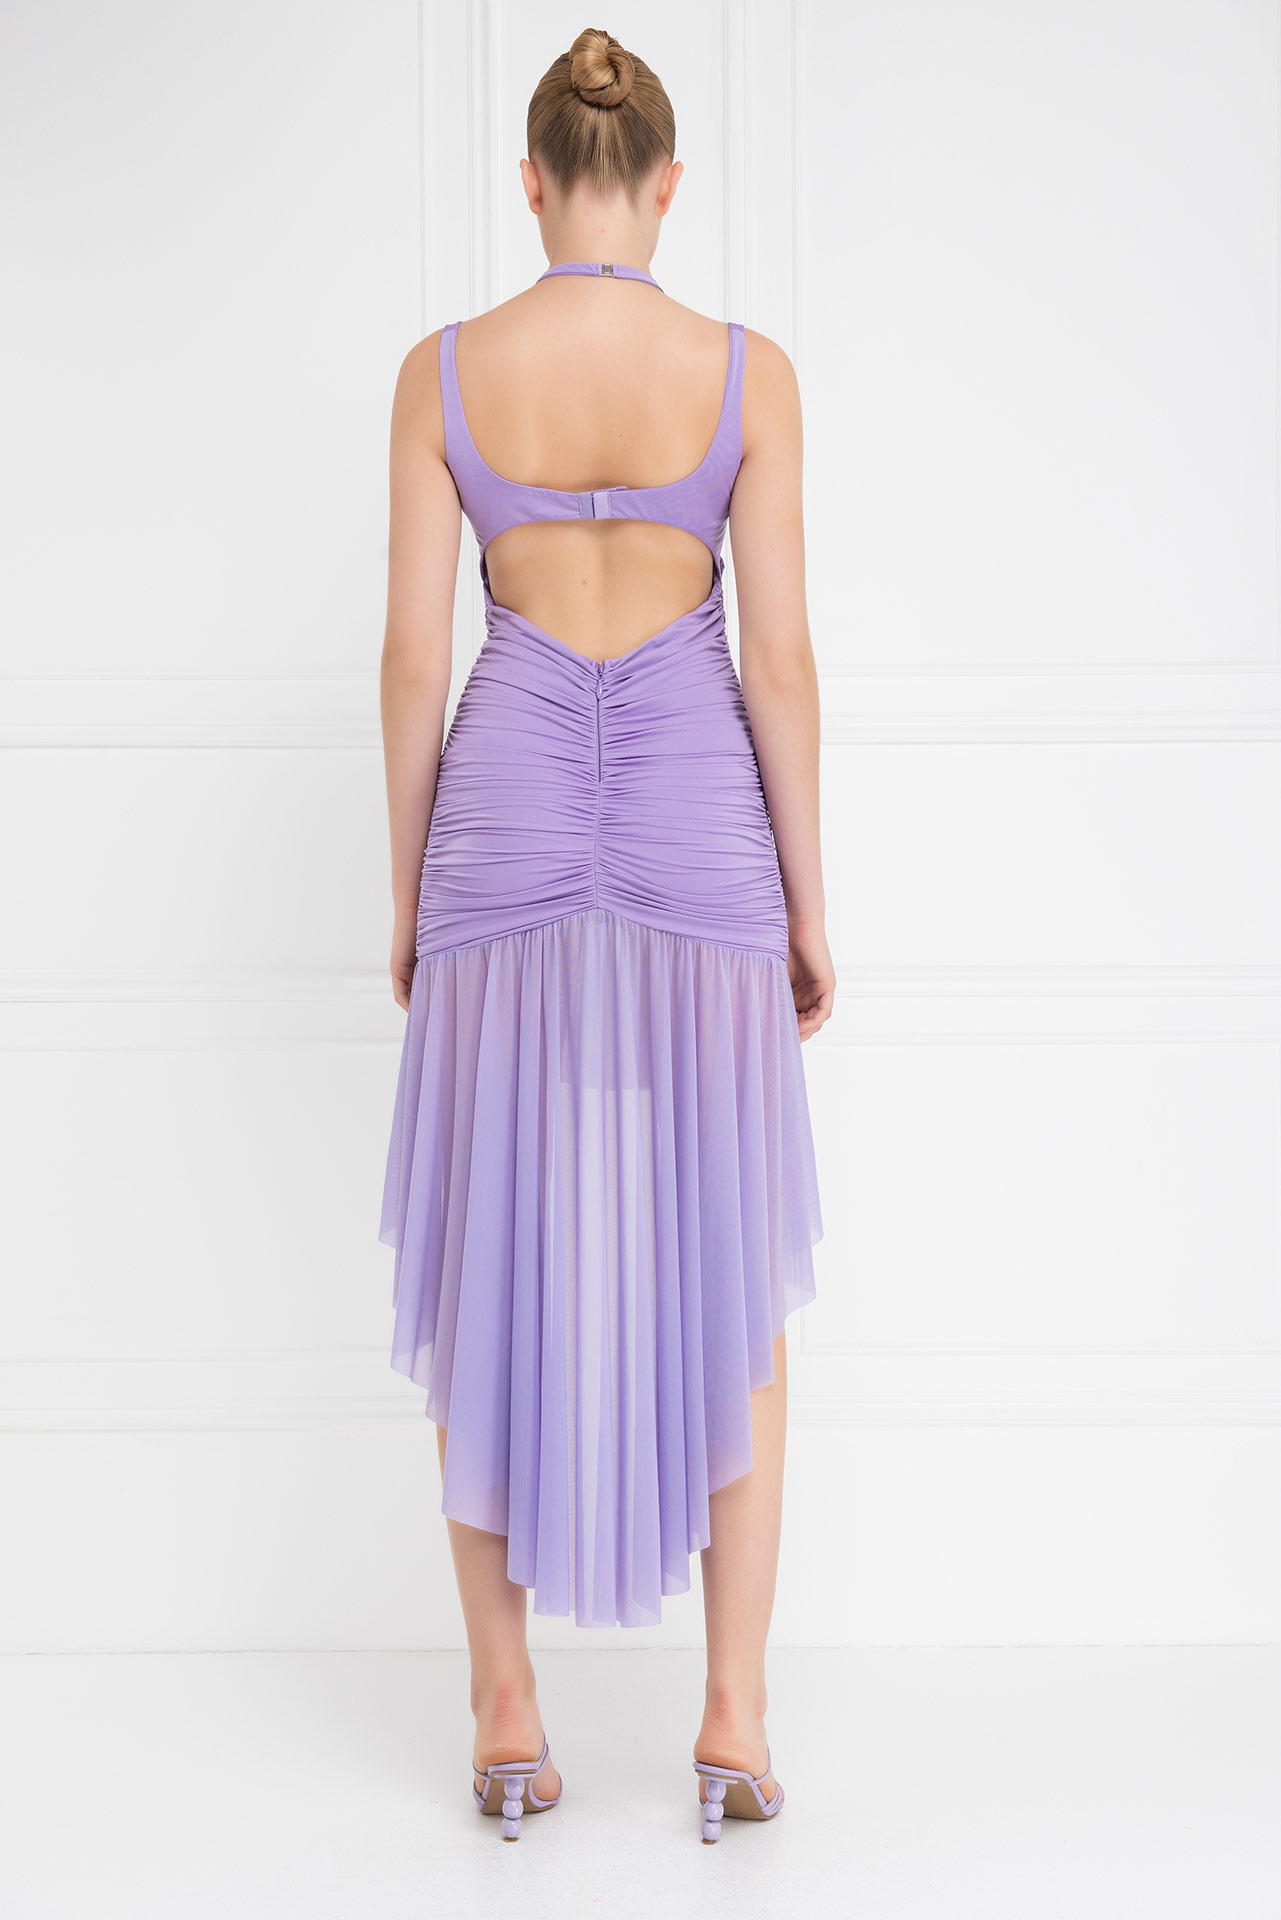 Wholesale New Lilac Cut Out Front Ruffled Dress